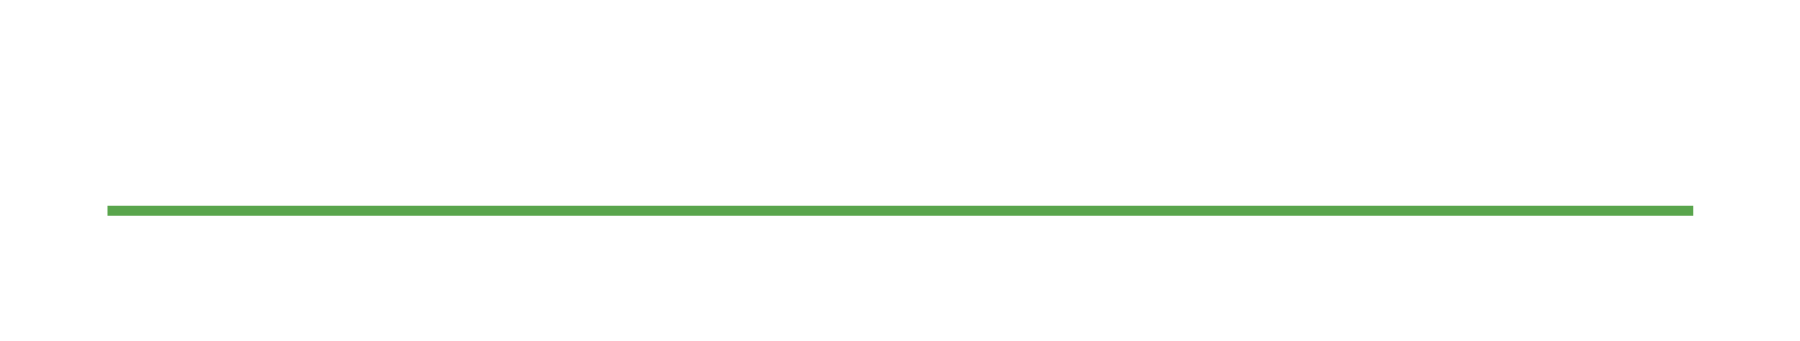 West Chatham Property Management Header Logo - Select To Go Home